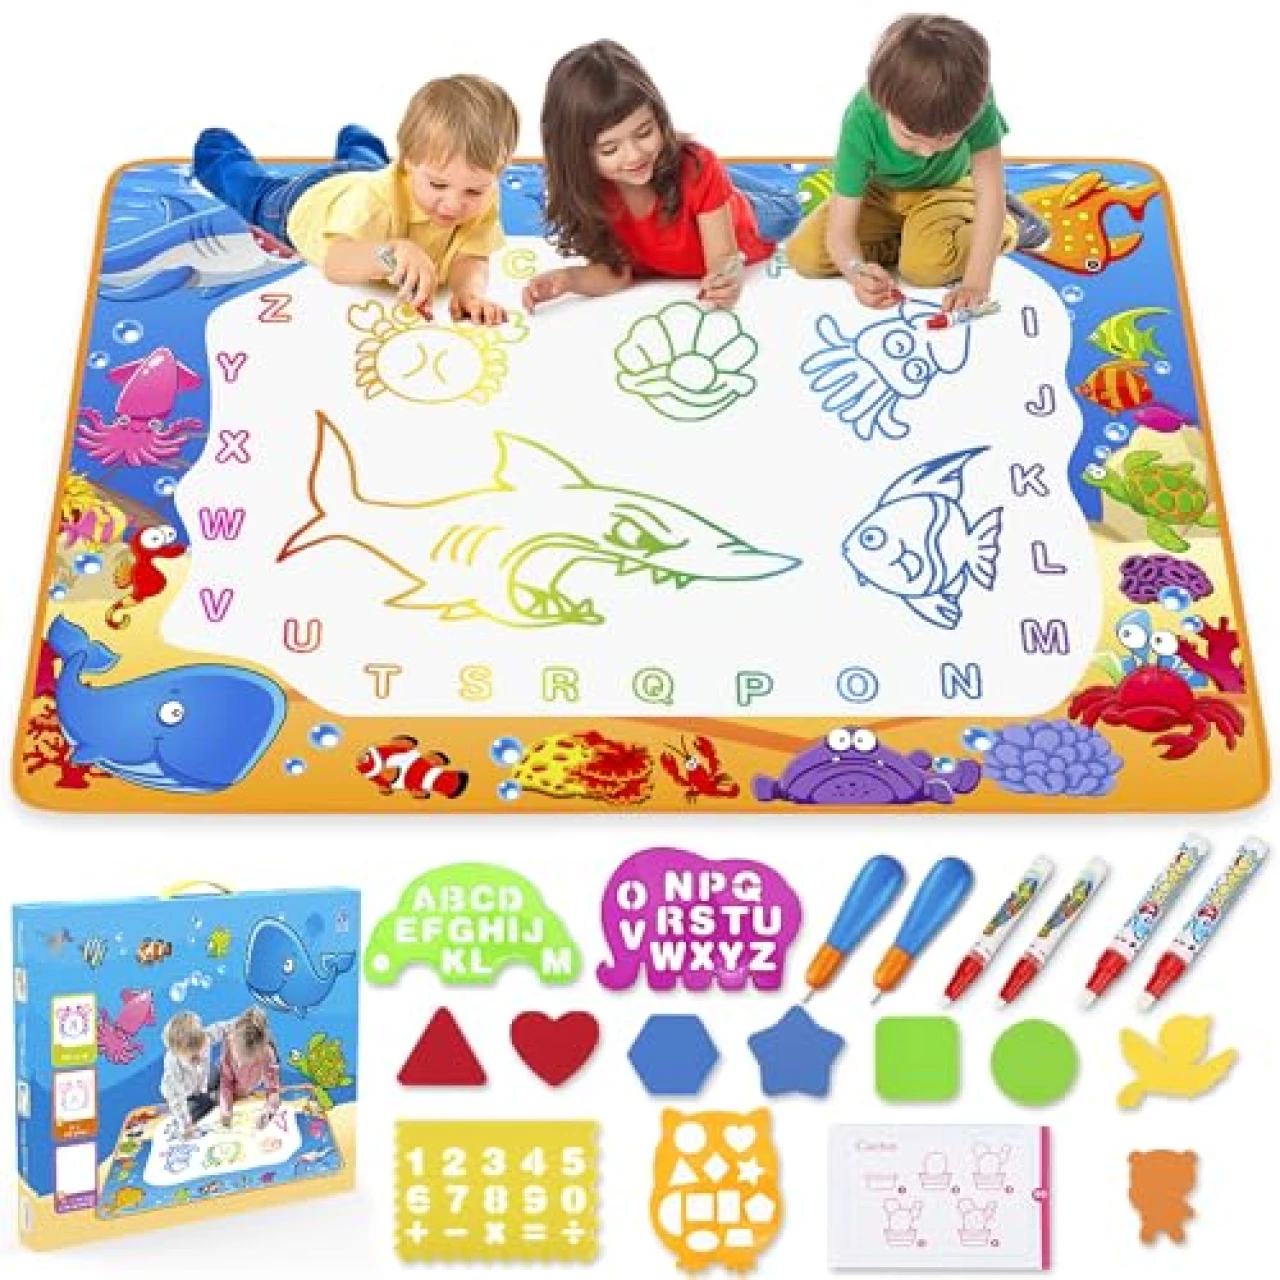 Water Doodle Mat - Kids Painting Writing Color Doodle Drawing Mat Toy